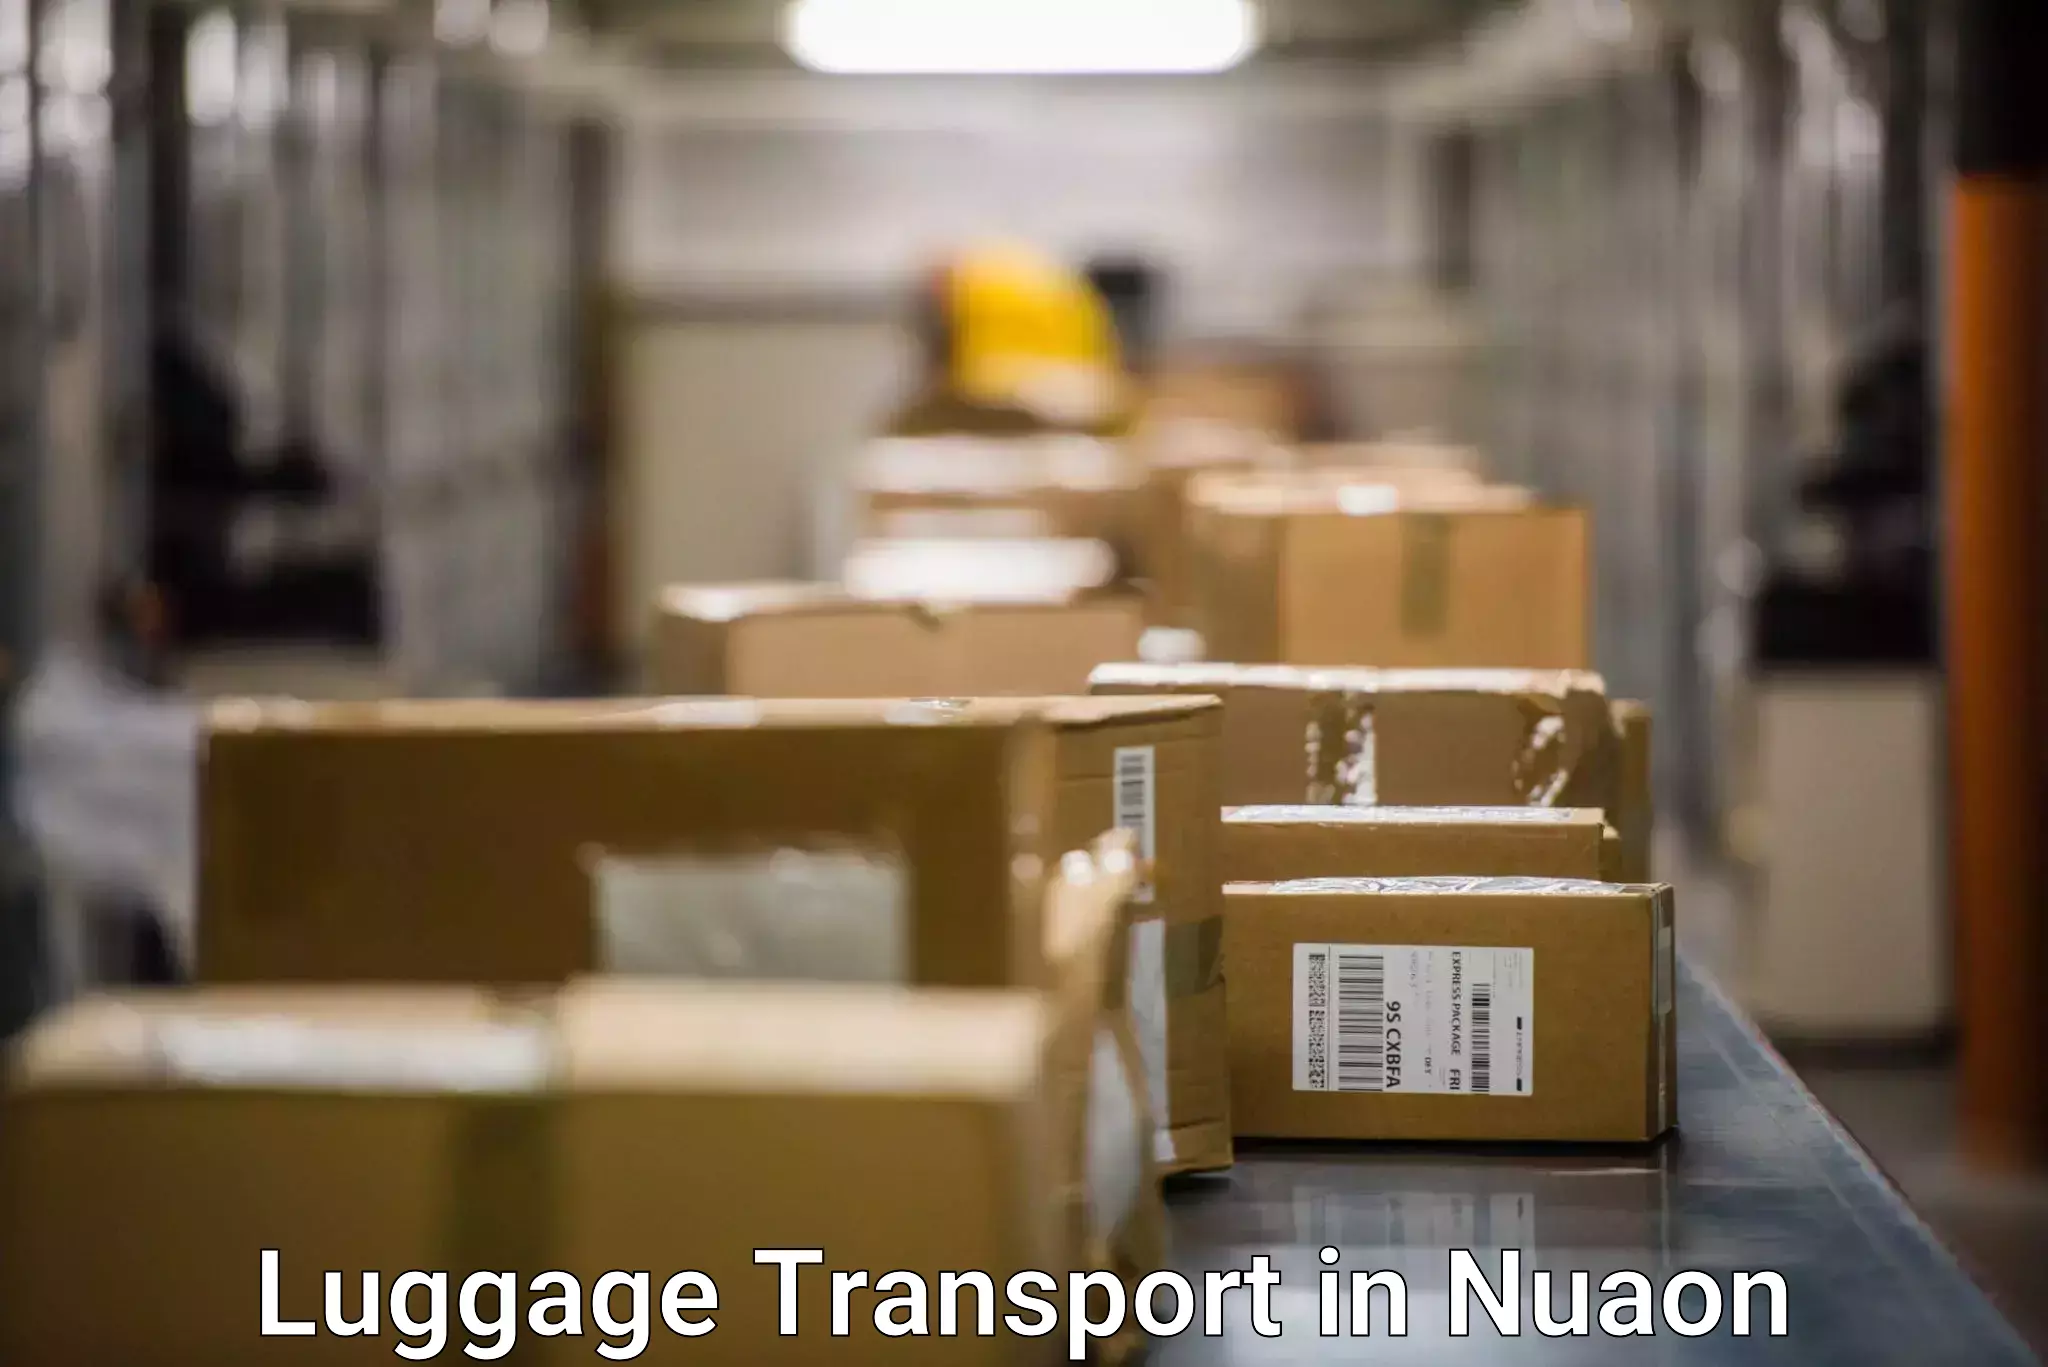 Corporate baggage transport in Nuaon